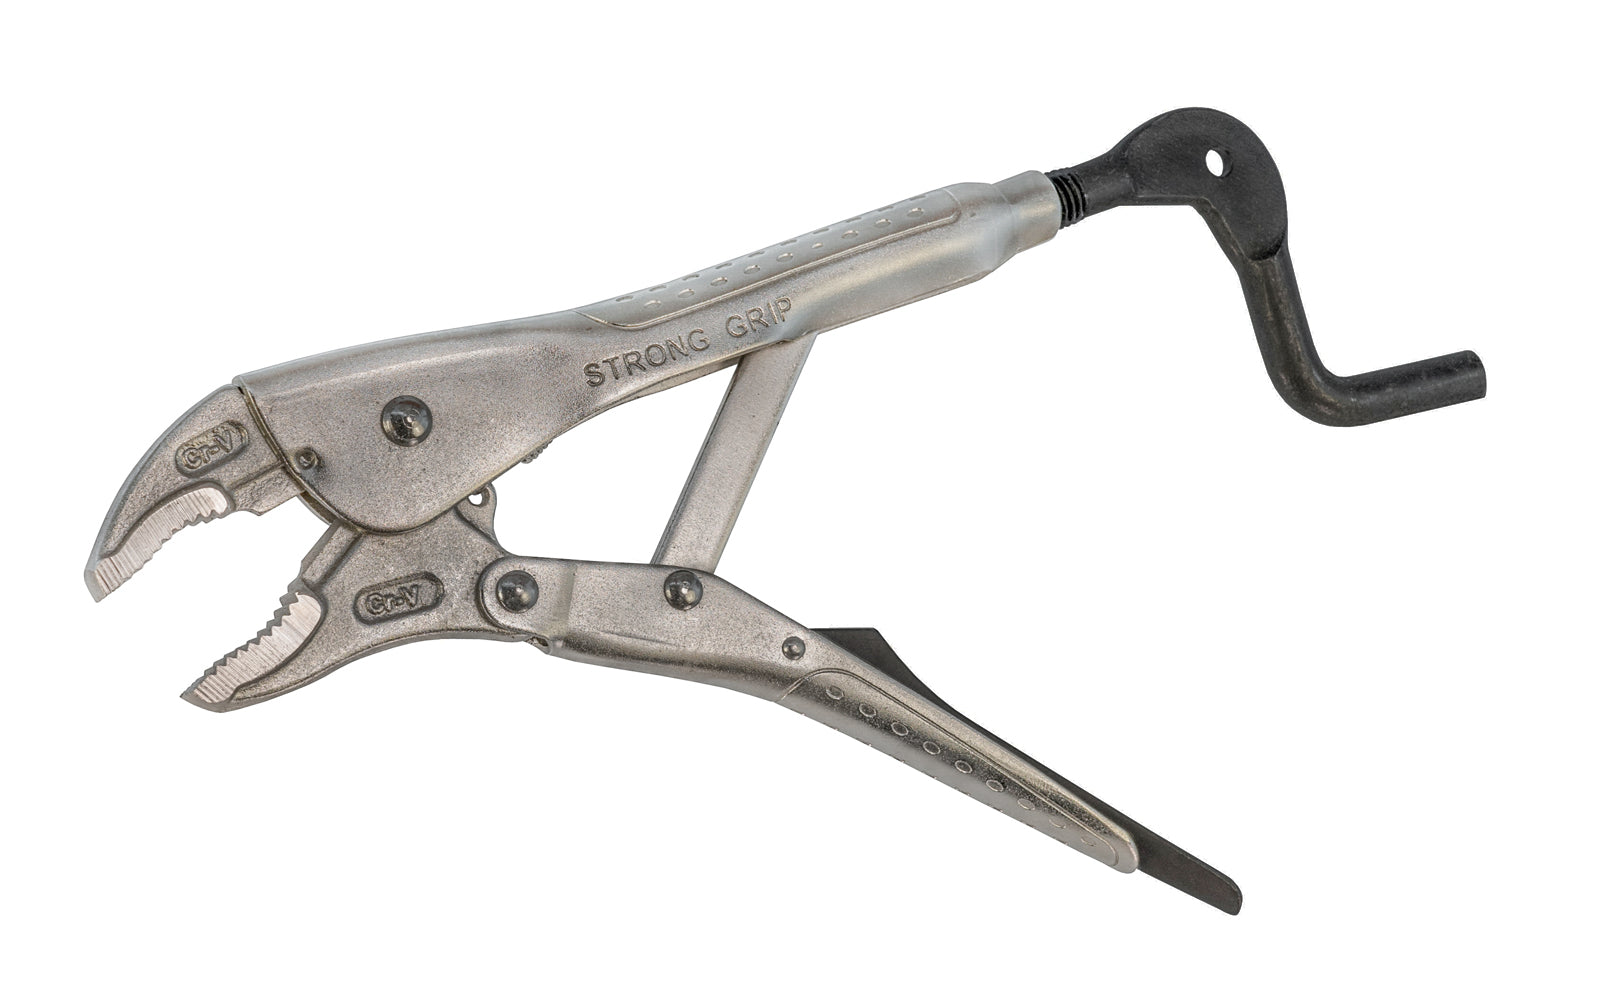 "Strong Grip" 8" Locking Pliers with Curved Jaws. Vise grip style plier made by StrongHand Tools. Model PCJ100.